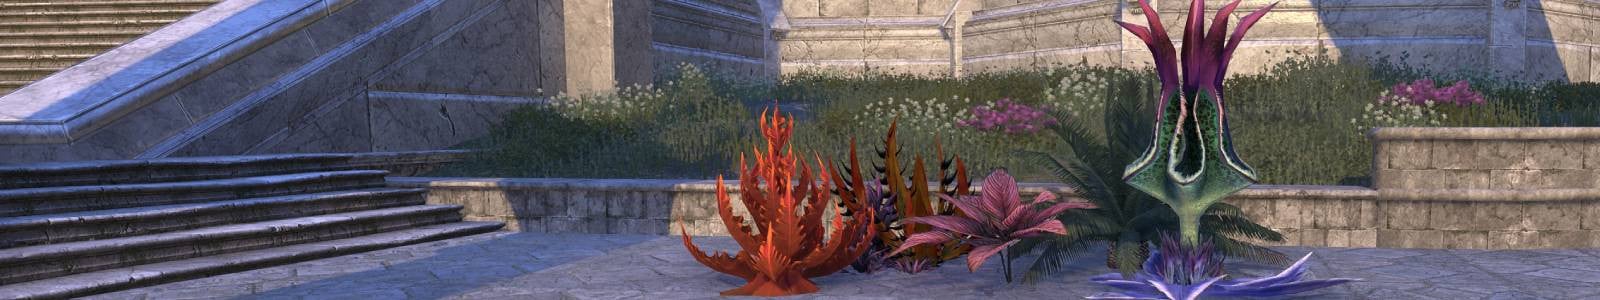 Alinor Potted Plant, Double Tiered - ESO header